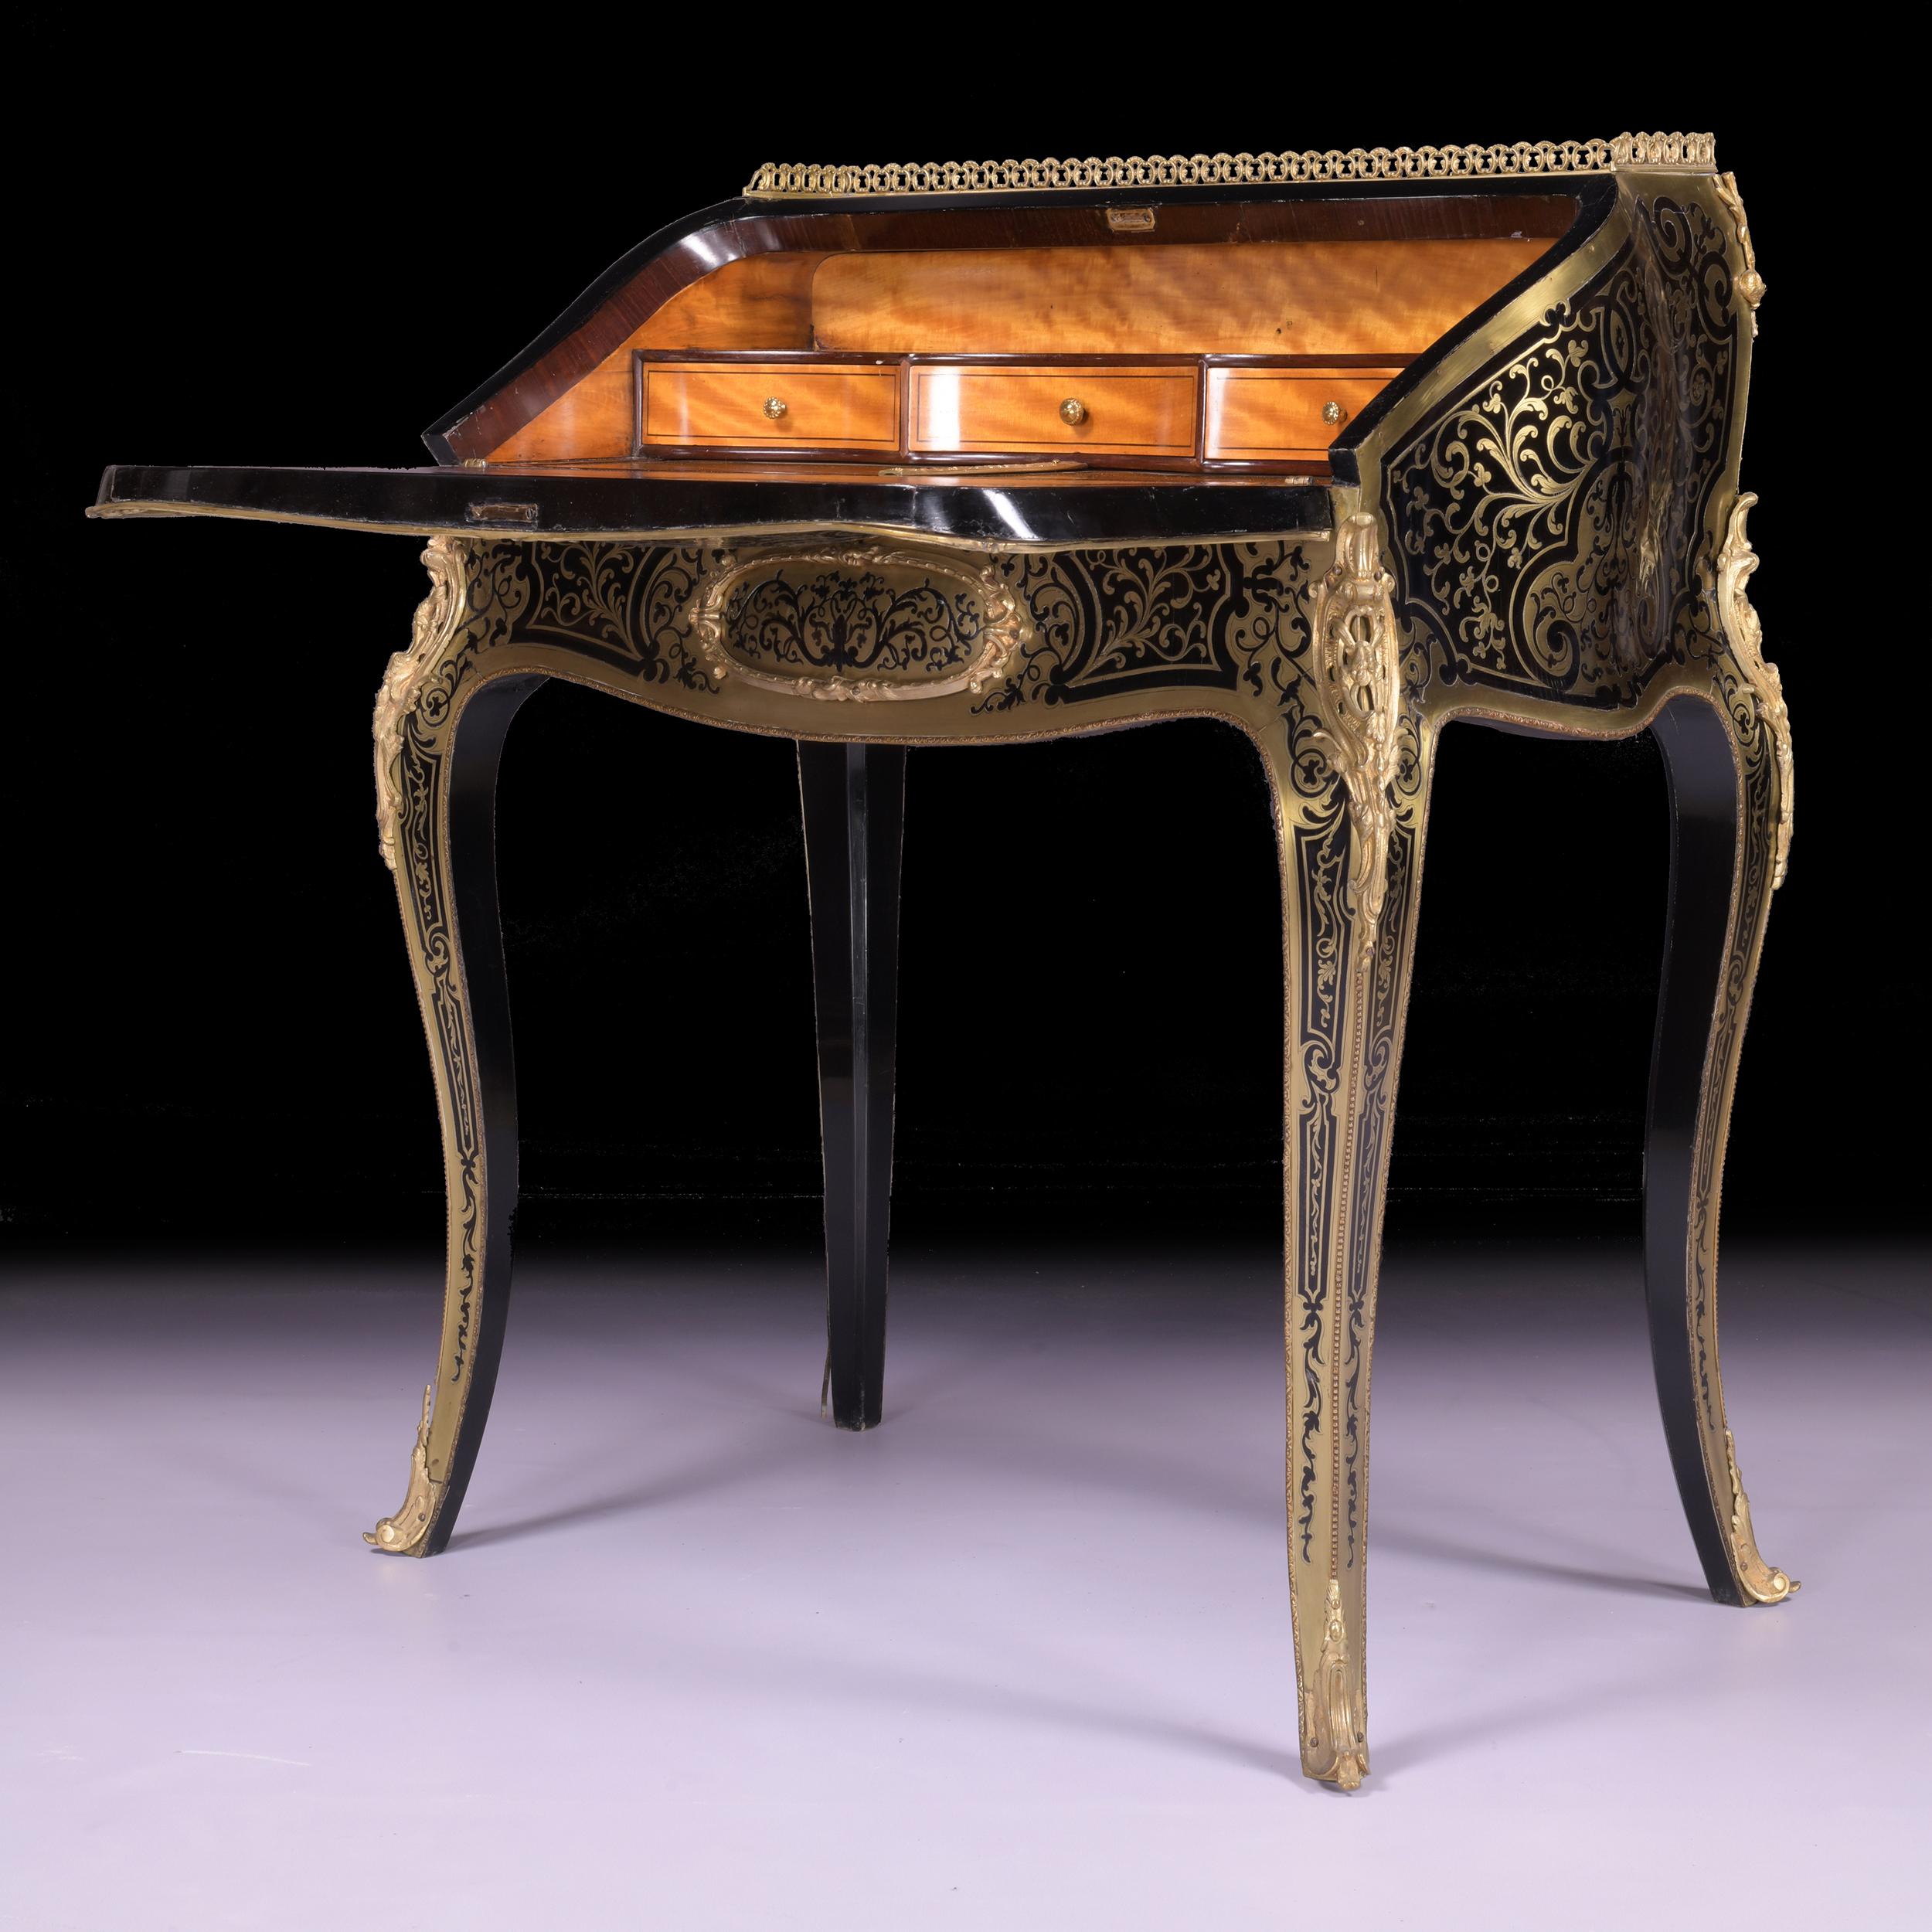 19th Century French Louis XV Style Boulle Ladies Bombe Bureau For Sale 6